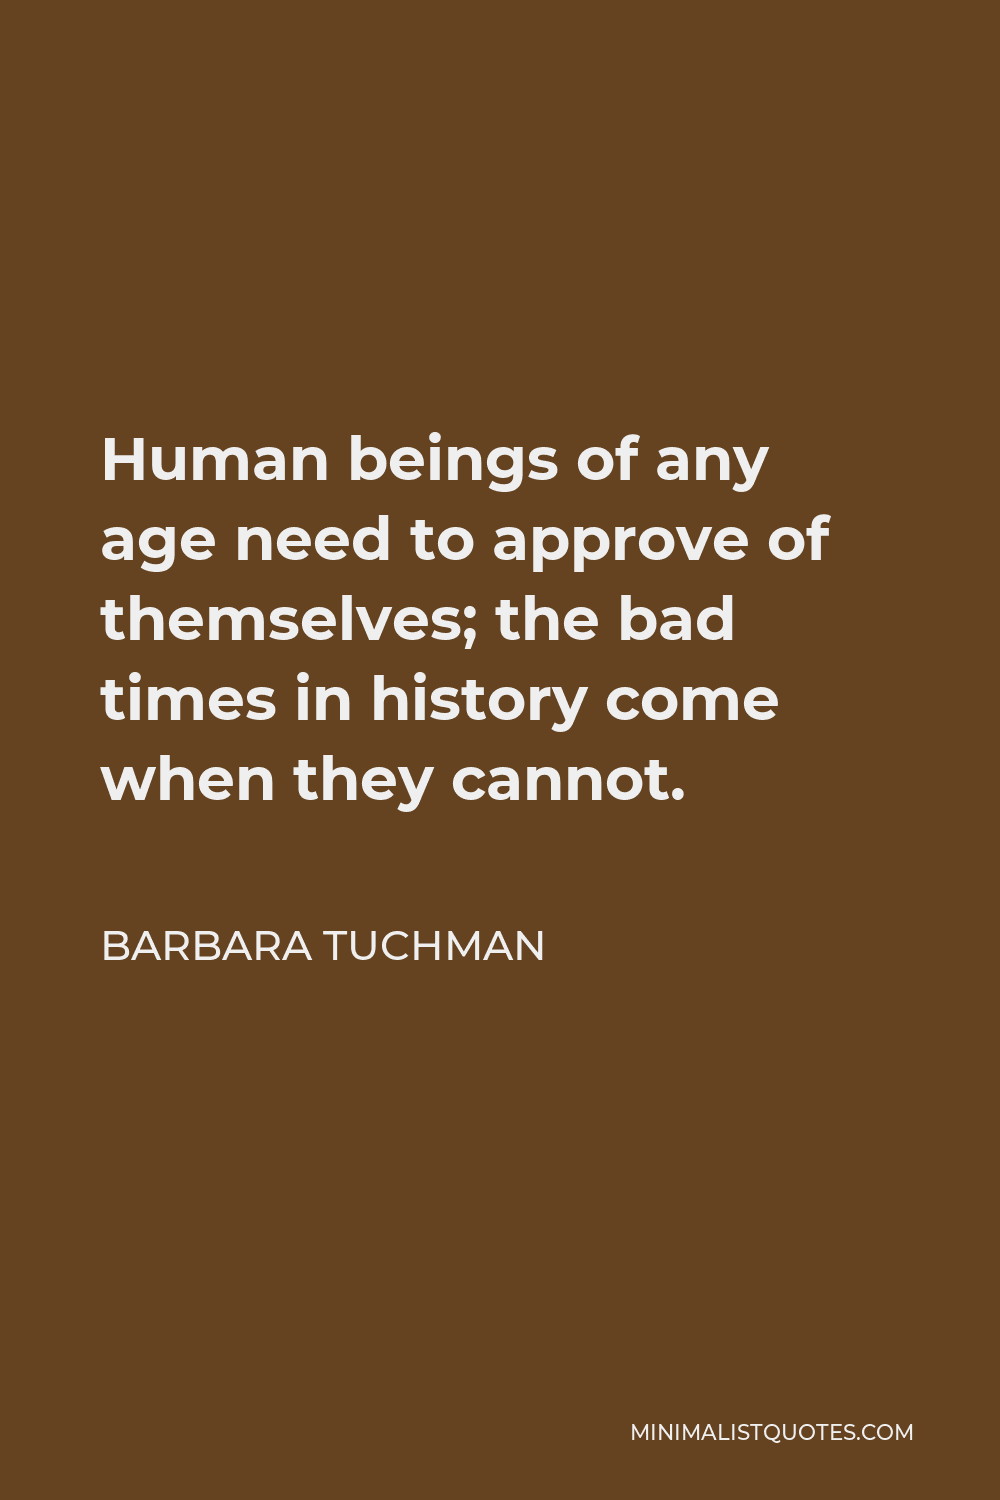 Barbara Tuchman Quote - Human beings of any age need to approve of themselves; the bad times in history come when they cannot.